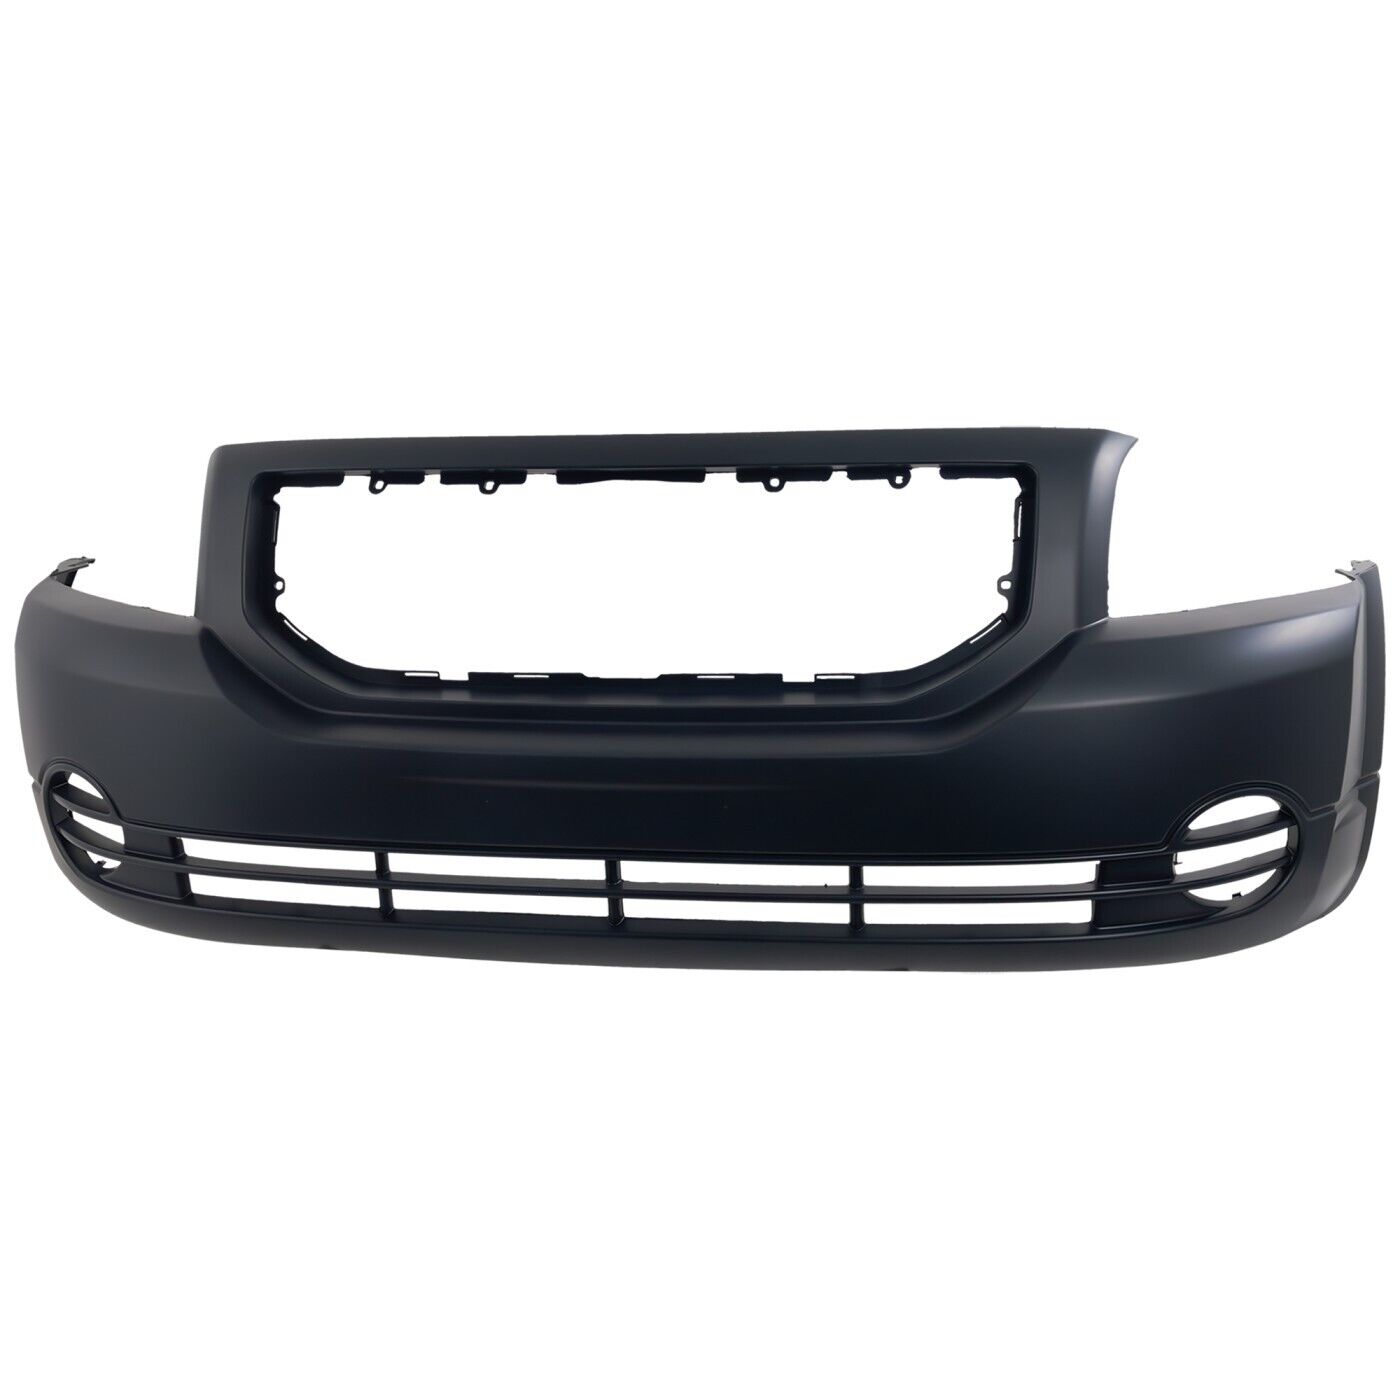 Front Bumper Cover For 2007-2012 Dodge Caliber Primed 5183407AE